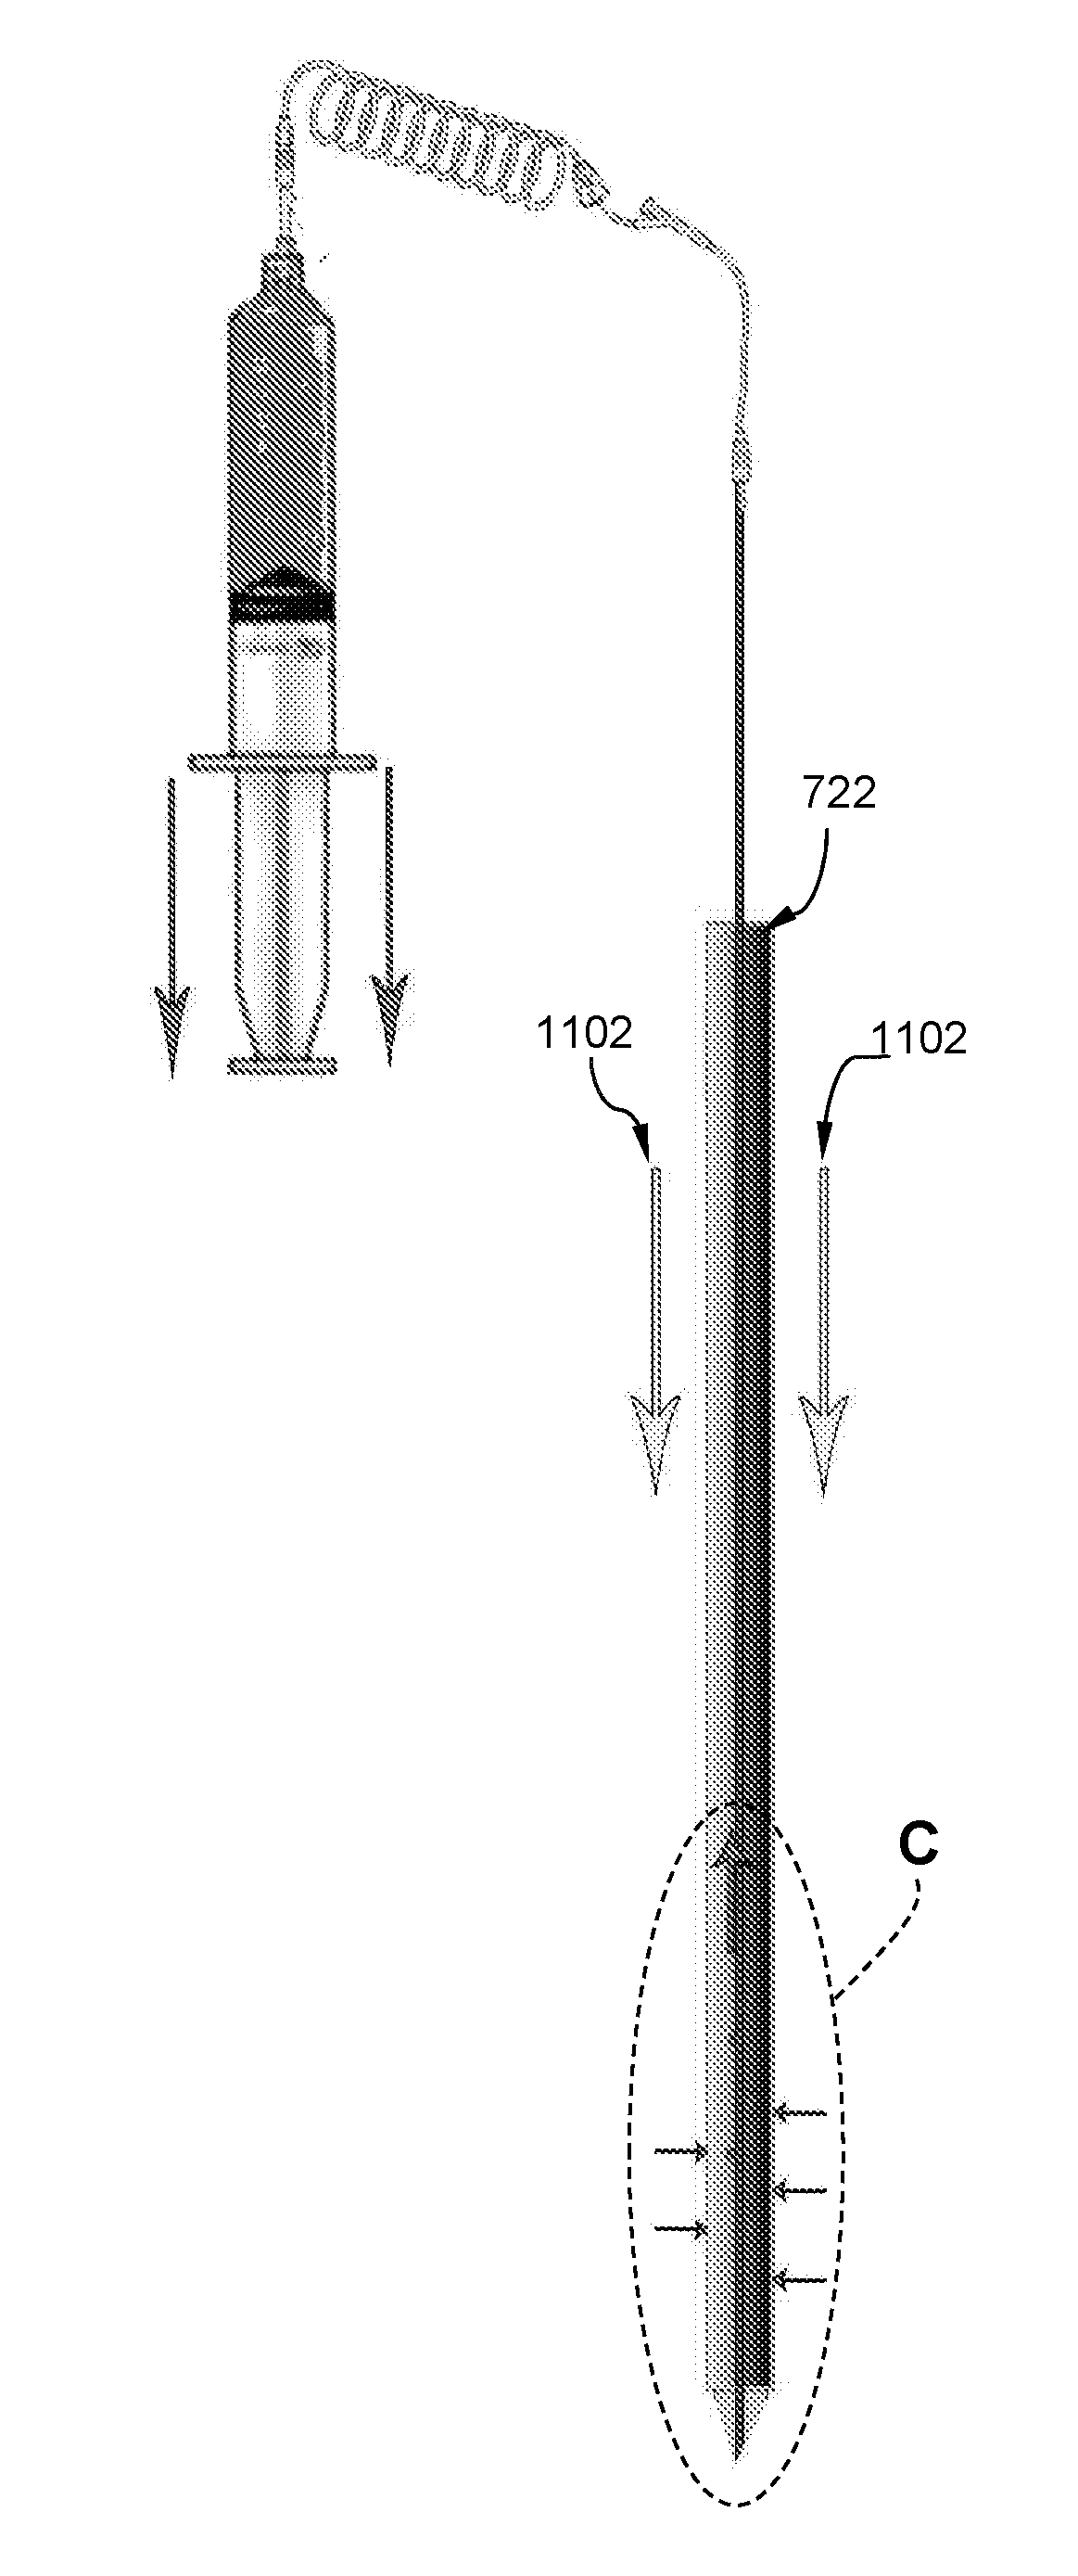 Integrated painless bone marrow biopsy device